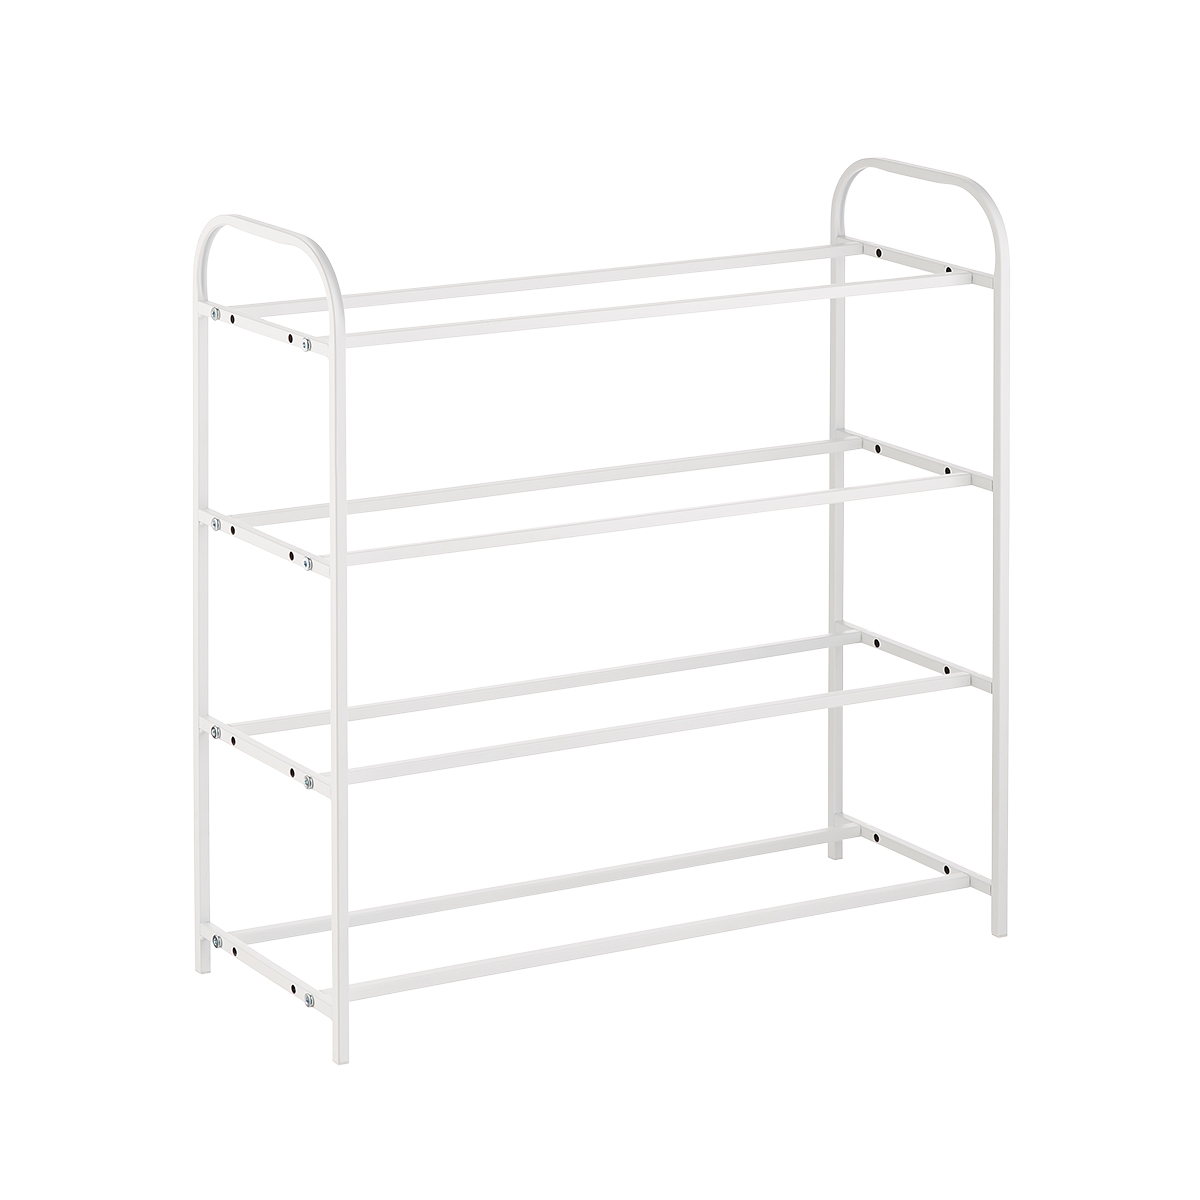 https://www.containerstore.com/catalogimages/398264/10080935-white-4-tier-shoe-rack-with.jpg